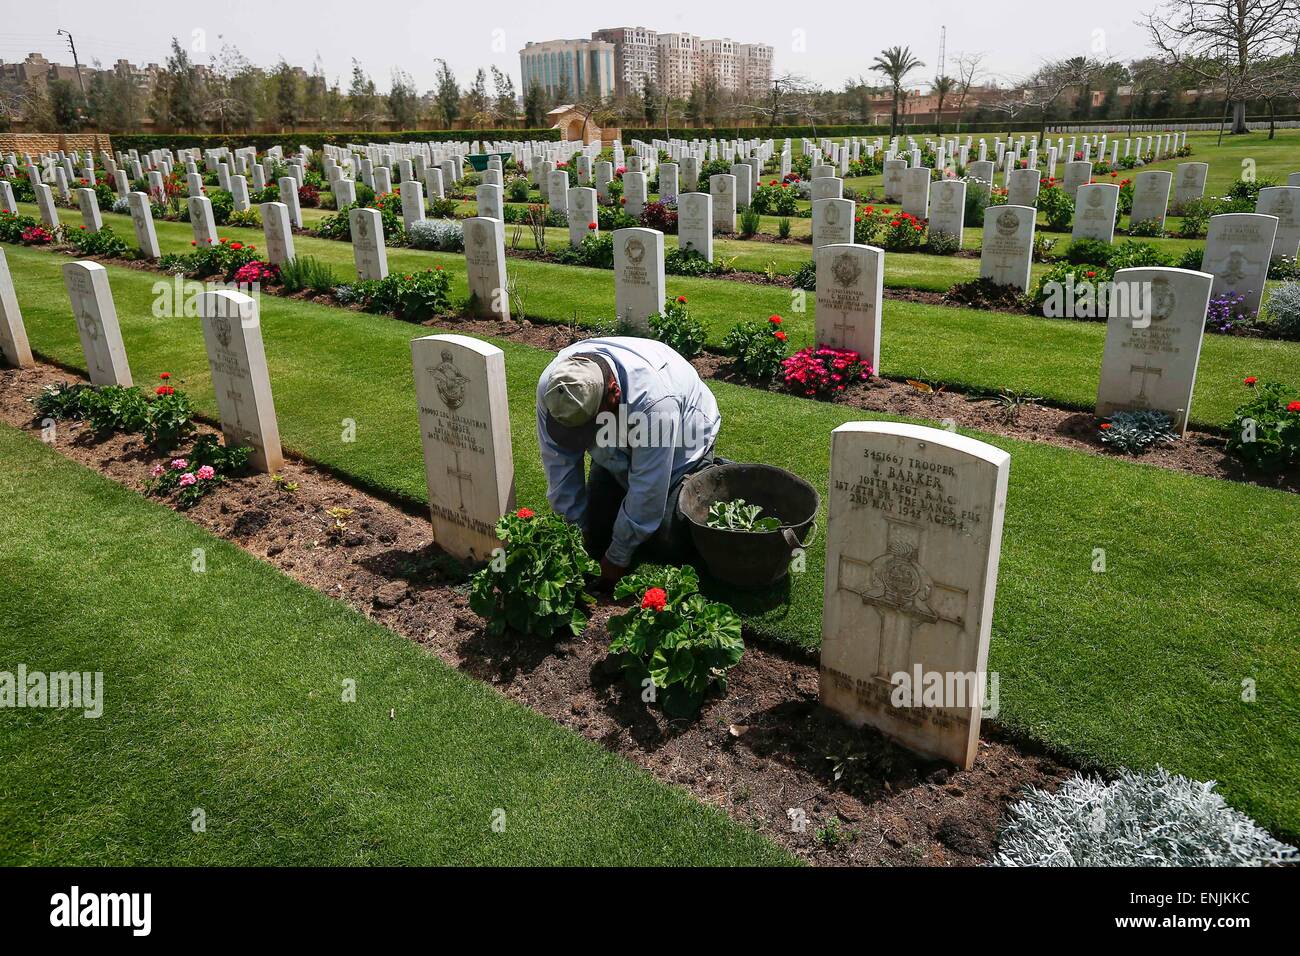 Cairo. 27th Apr, 2015. A gardener trims the grass field at a World War II memorial cemetery in Cairo, Egypt, on April 27, 2015, ahead of the 70th anniversary of the victory of the world anti-Fascism war. © Cui Xinyu/Xinhua/Alamy Live News Stock Photo